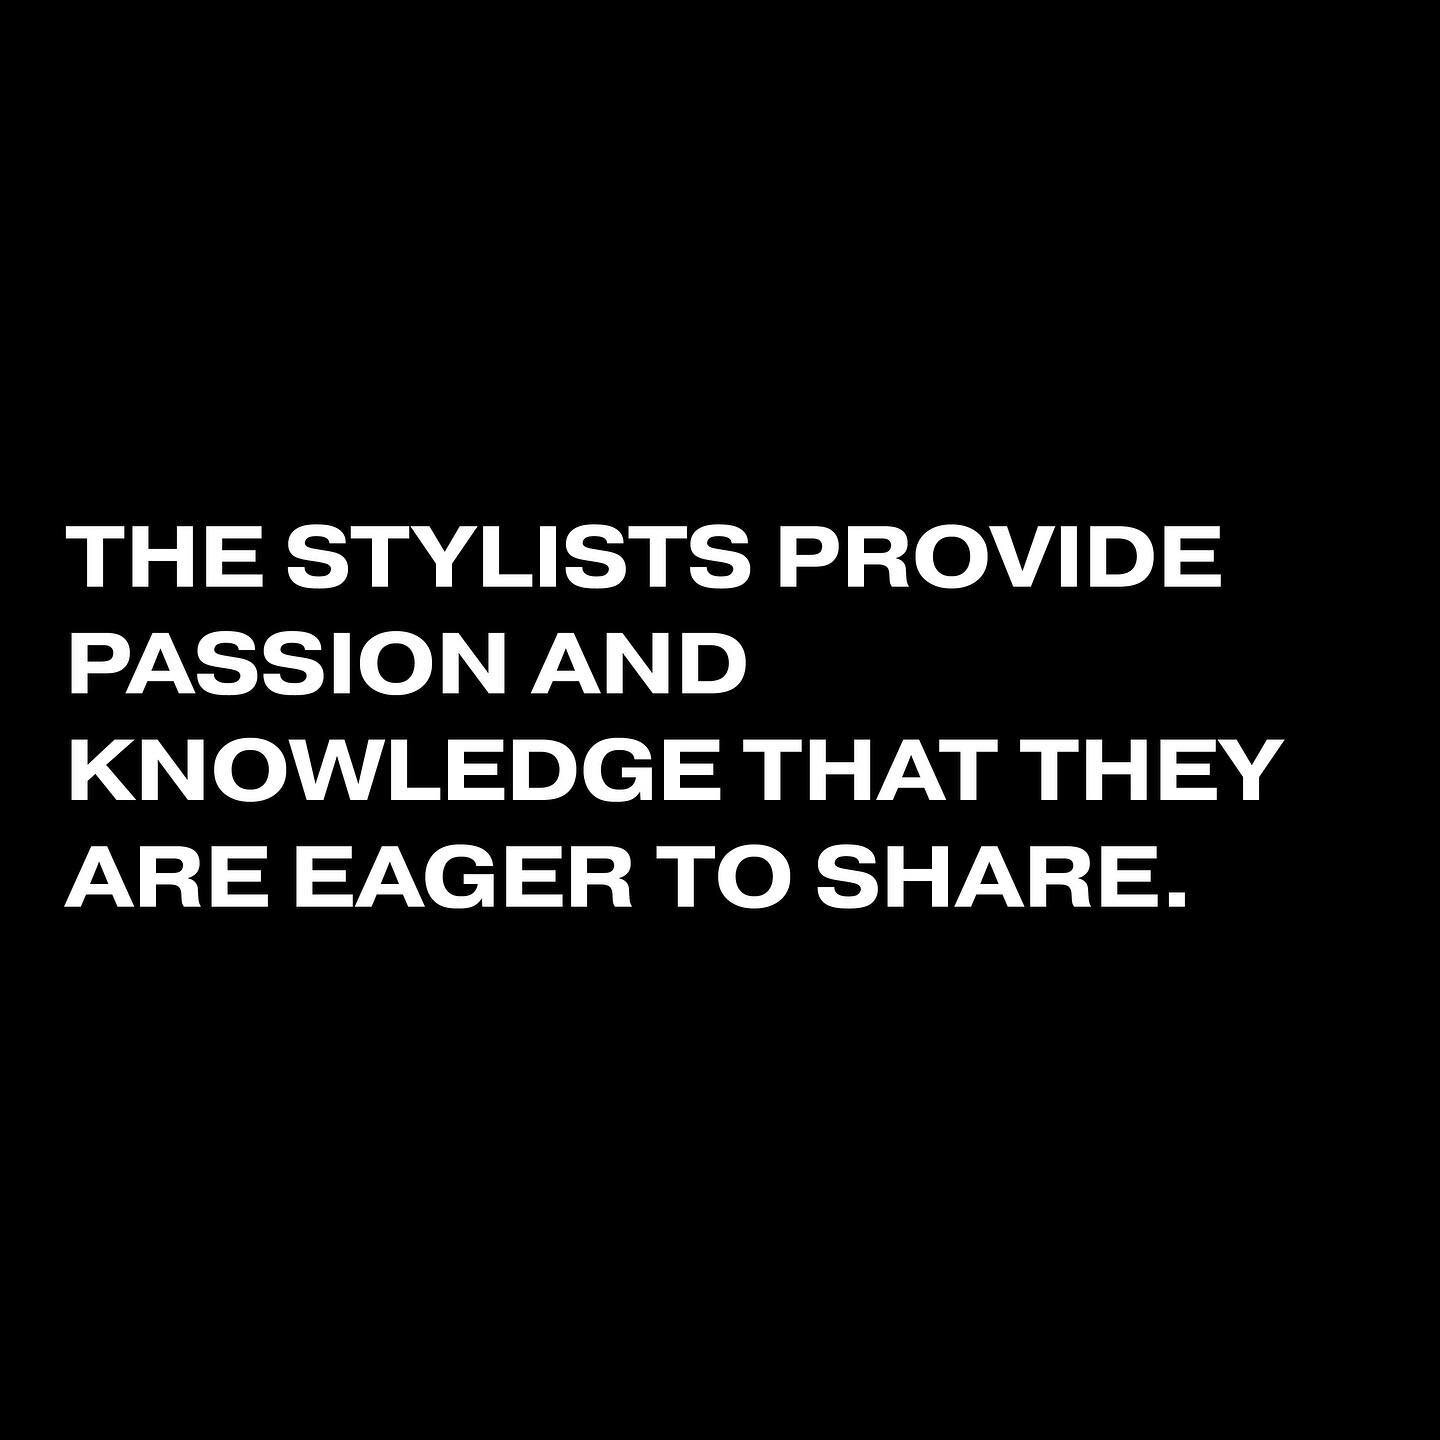 We have amazing, compassionate stylists on our team to help educate the community!